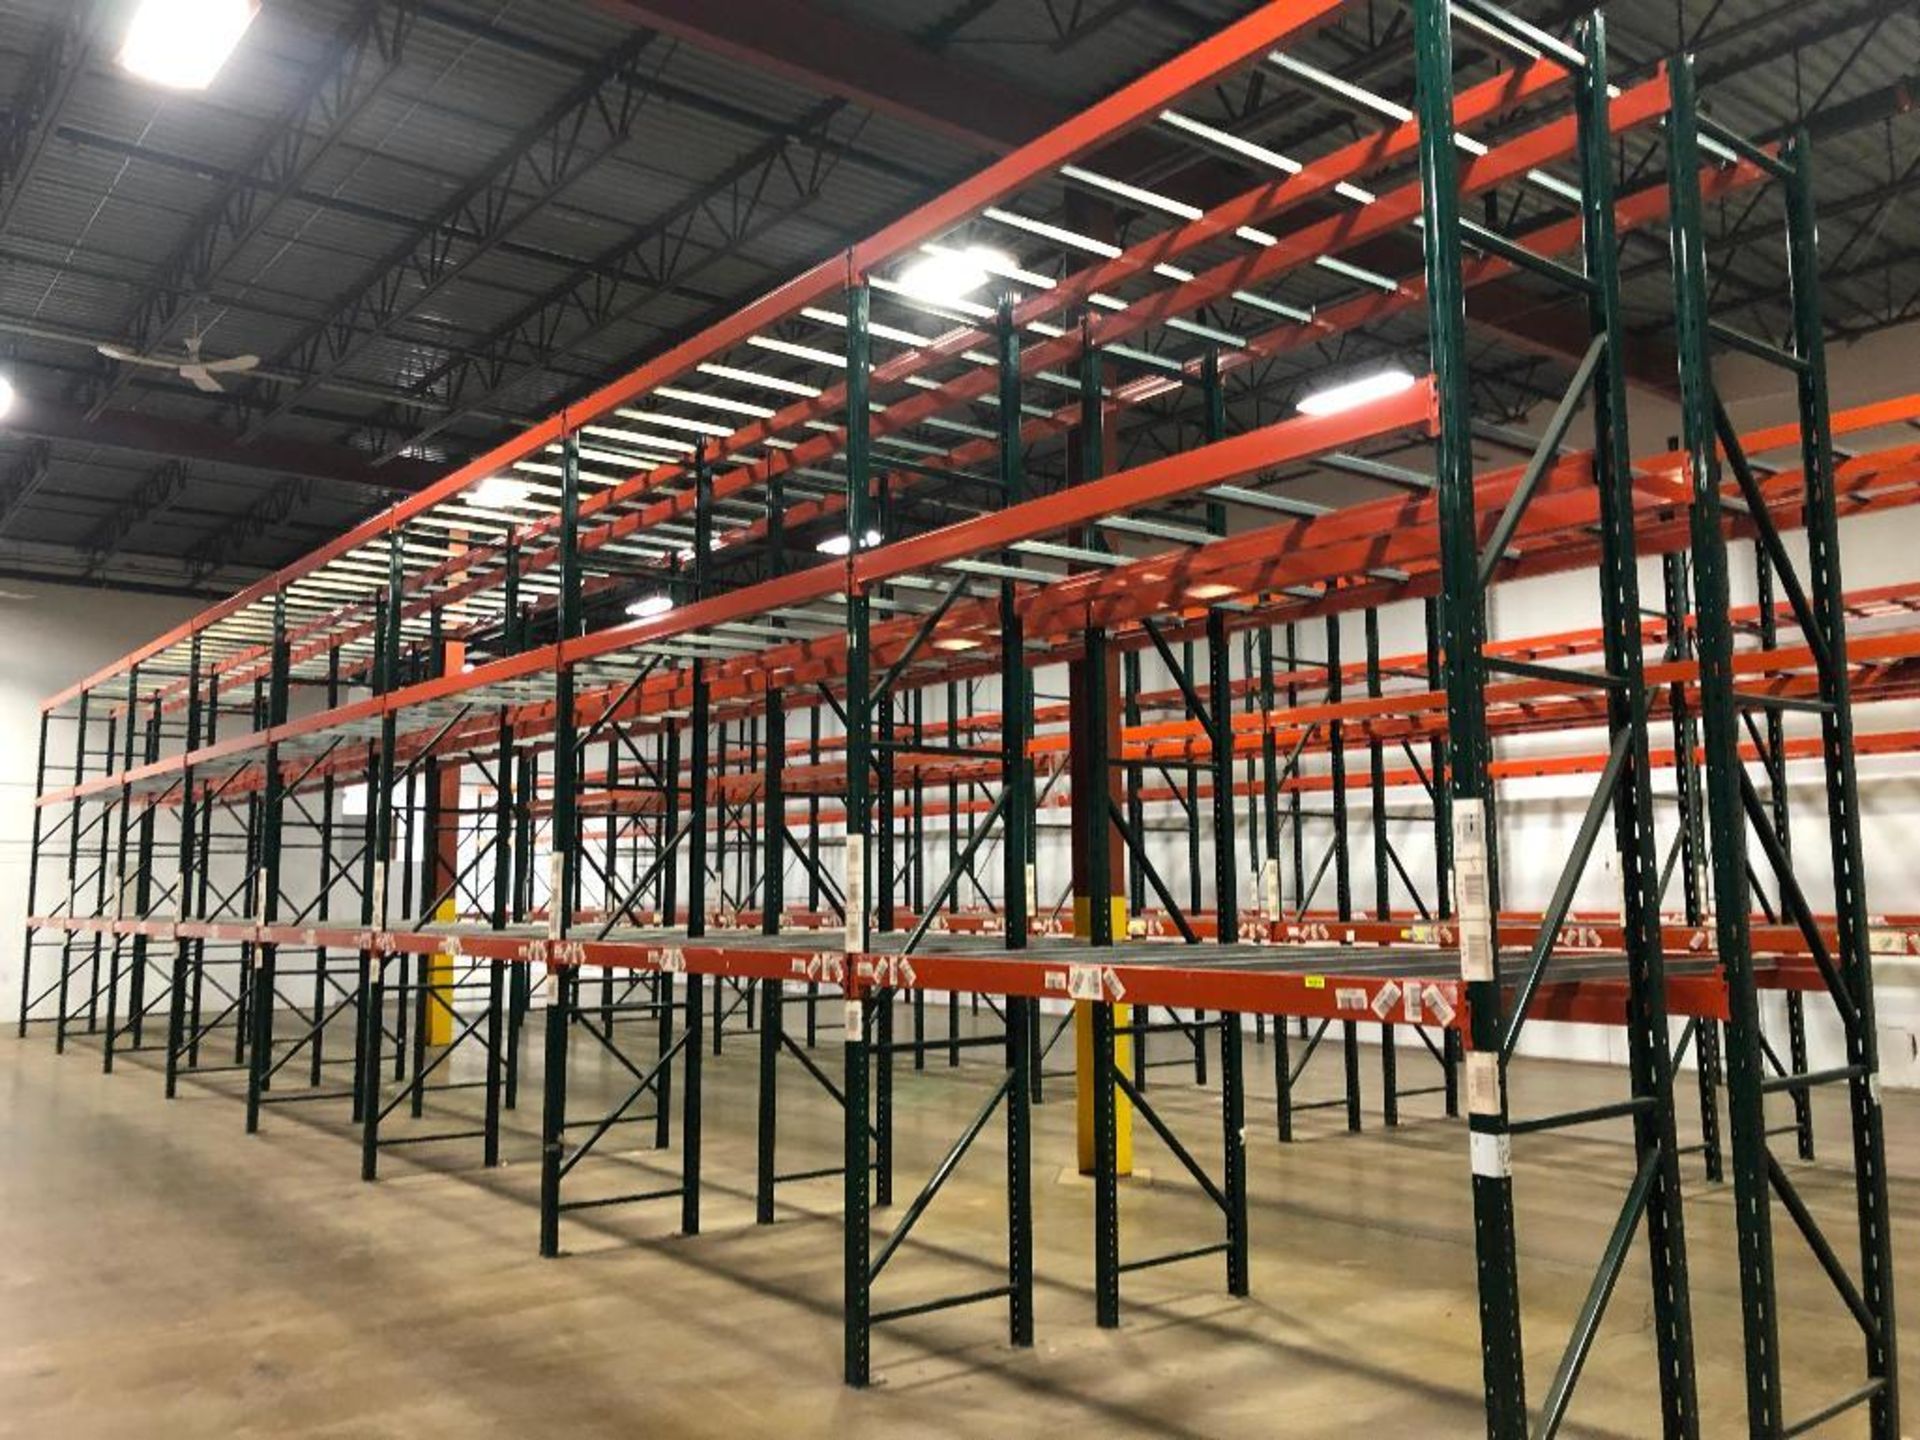 DESCRIPTION: (16) SECTIONS OF 9' X 3' X 15' PALLET RACKING ADDITIONAL INFORMATION: W/ (18) UPRIGHTS,